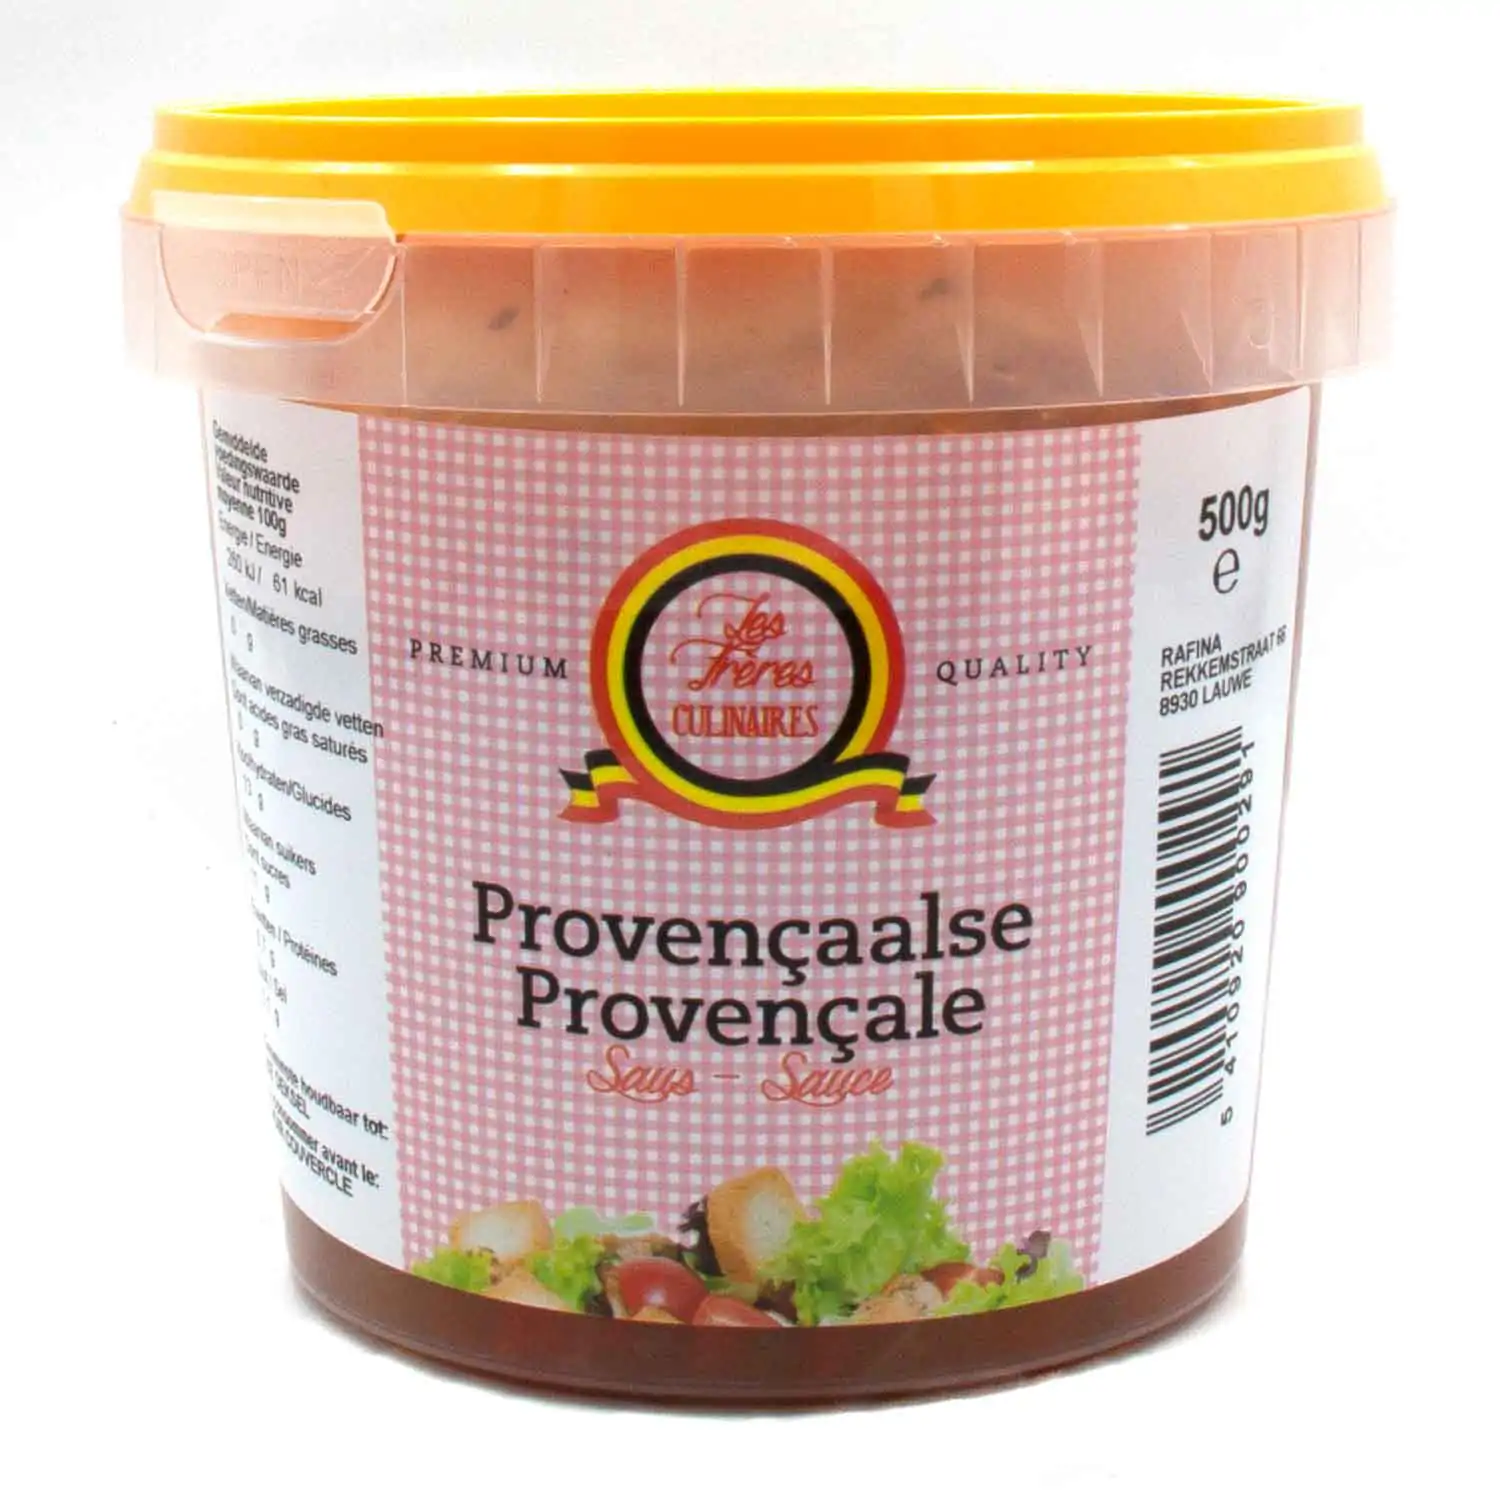 Les Frères Culinaires provencale 500g - Buy at Real Tobacco